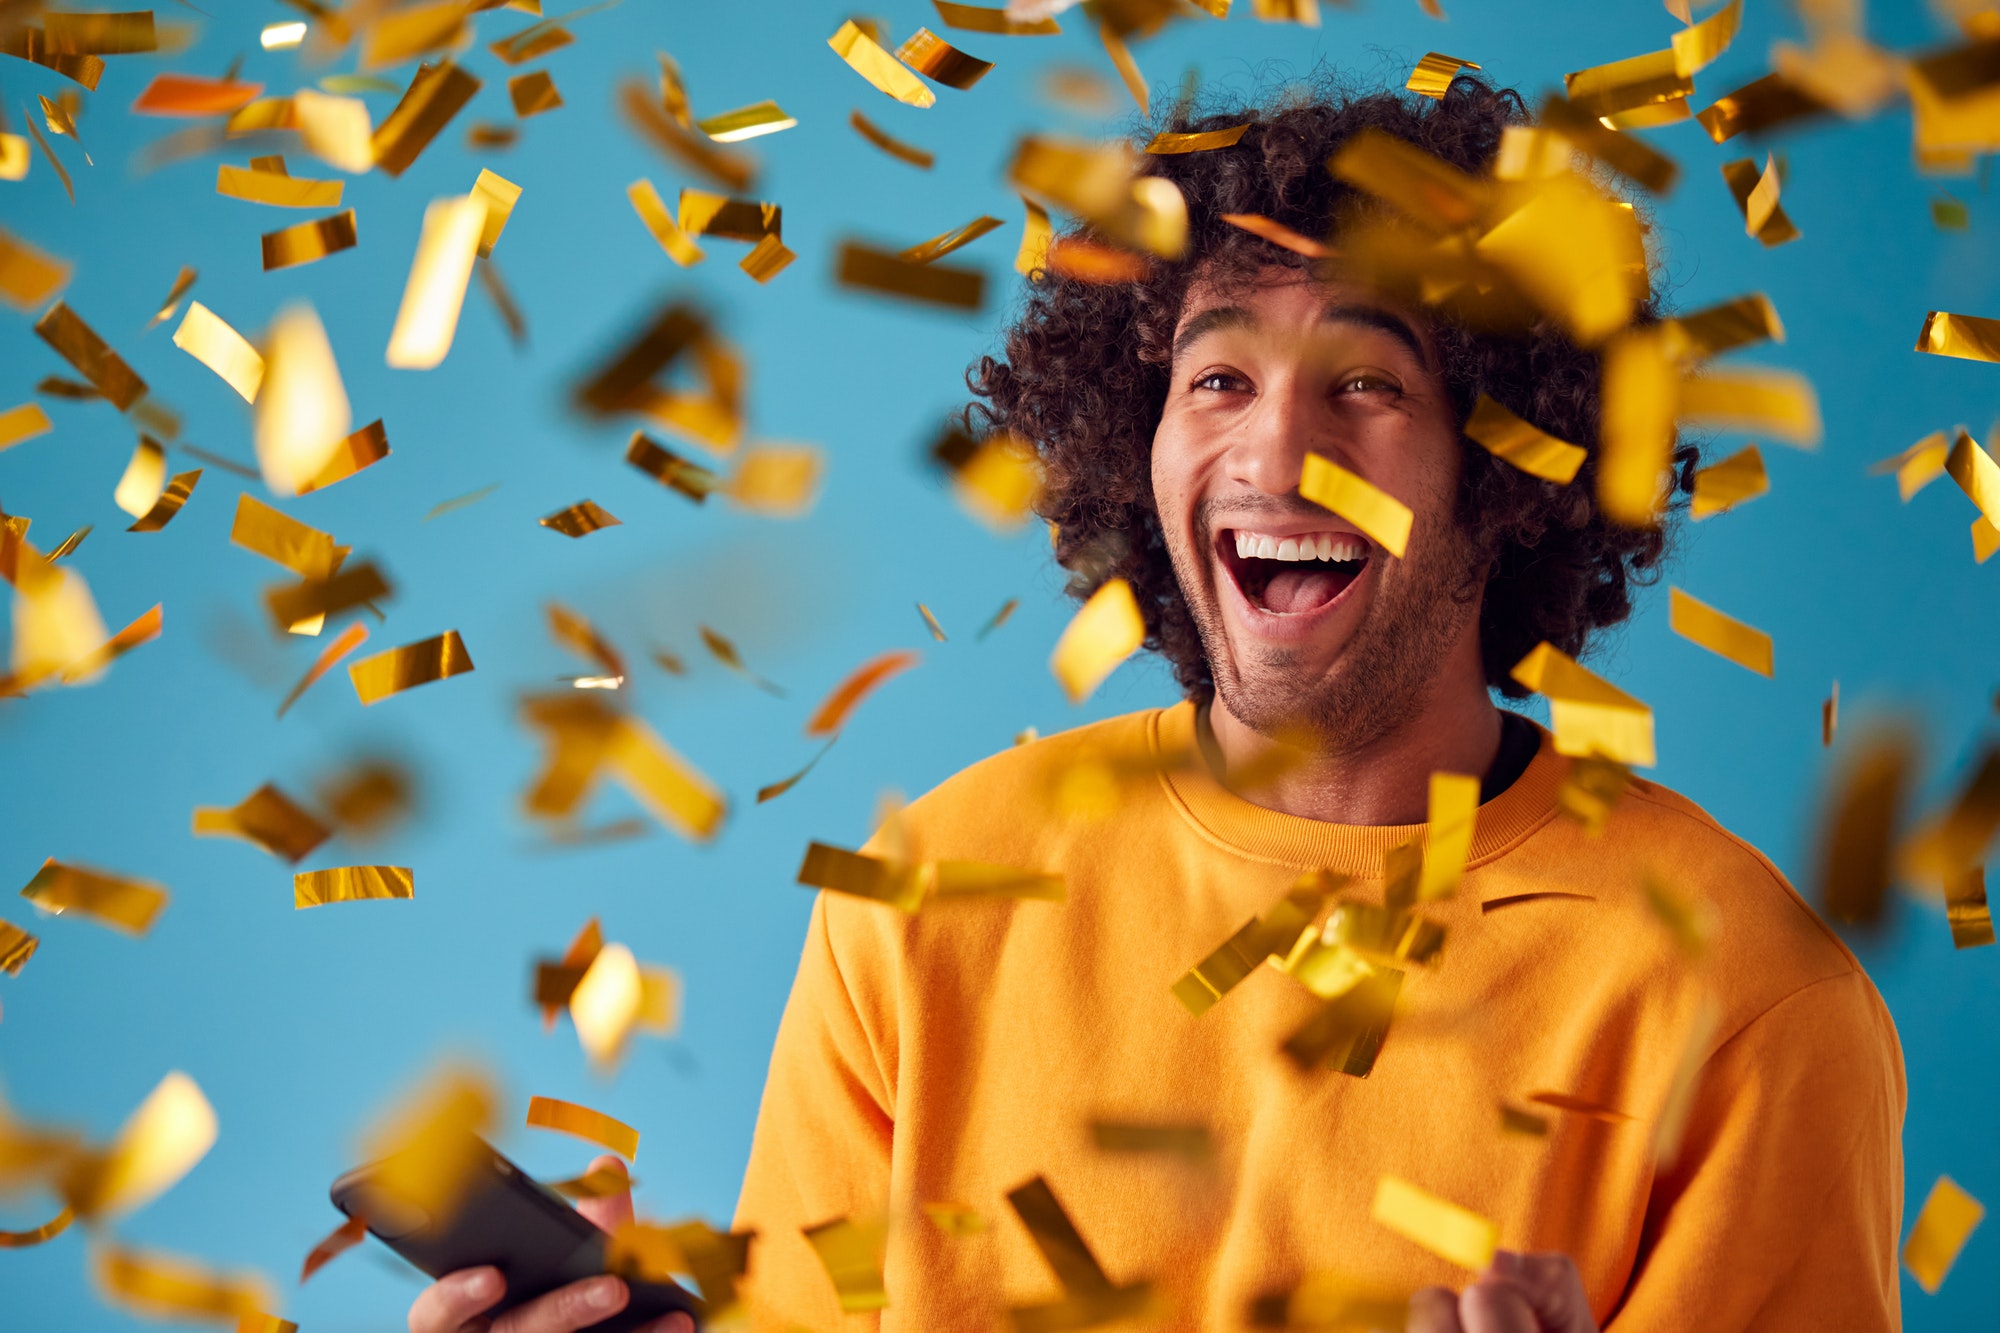 Celebrating Young Man With Mobile Phone Winning Prize And Showered With Gold Confetti In Studio